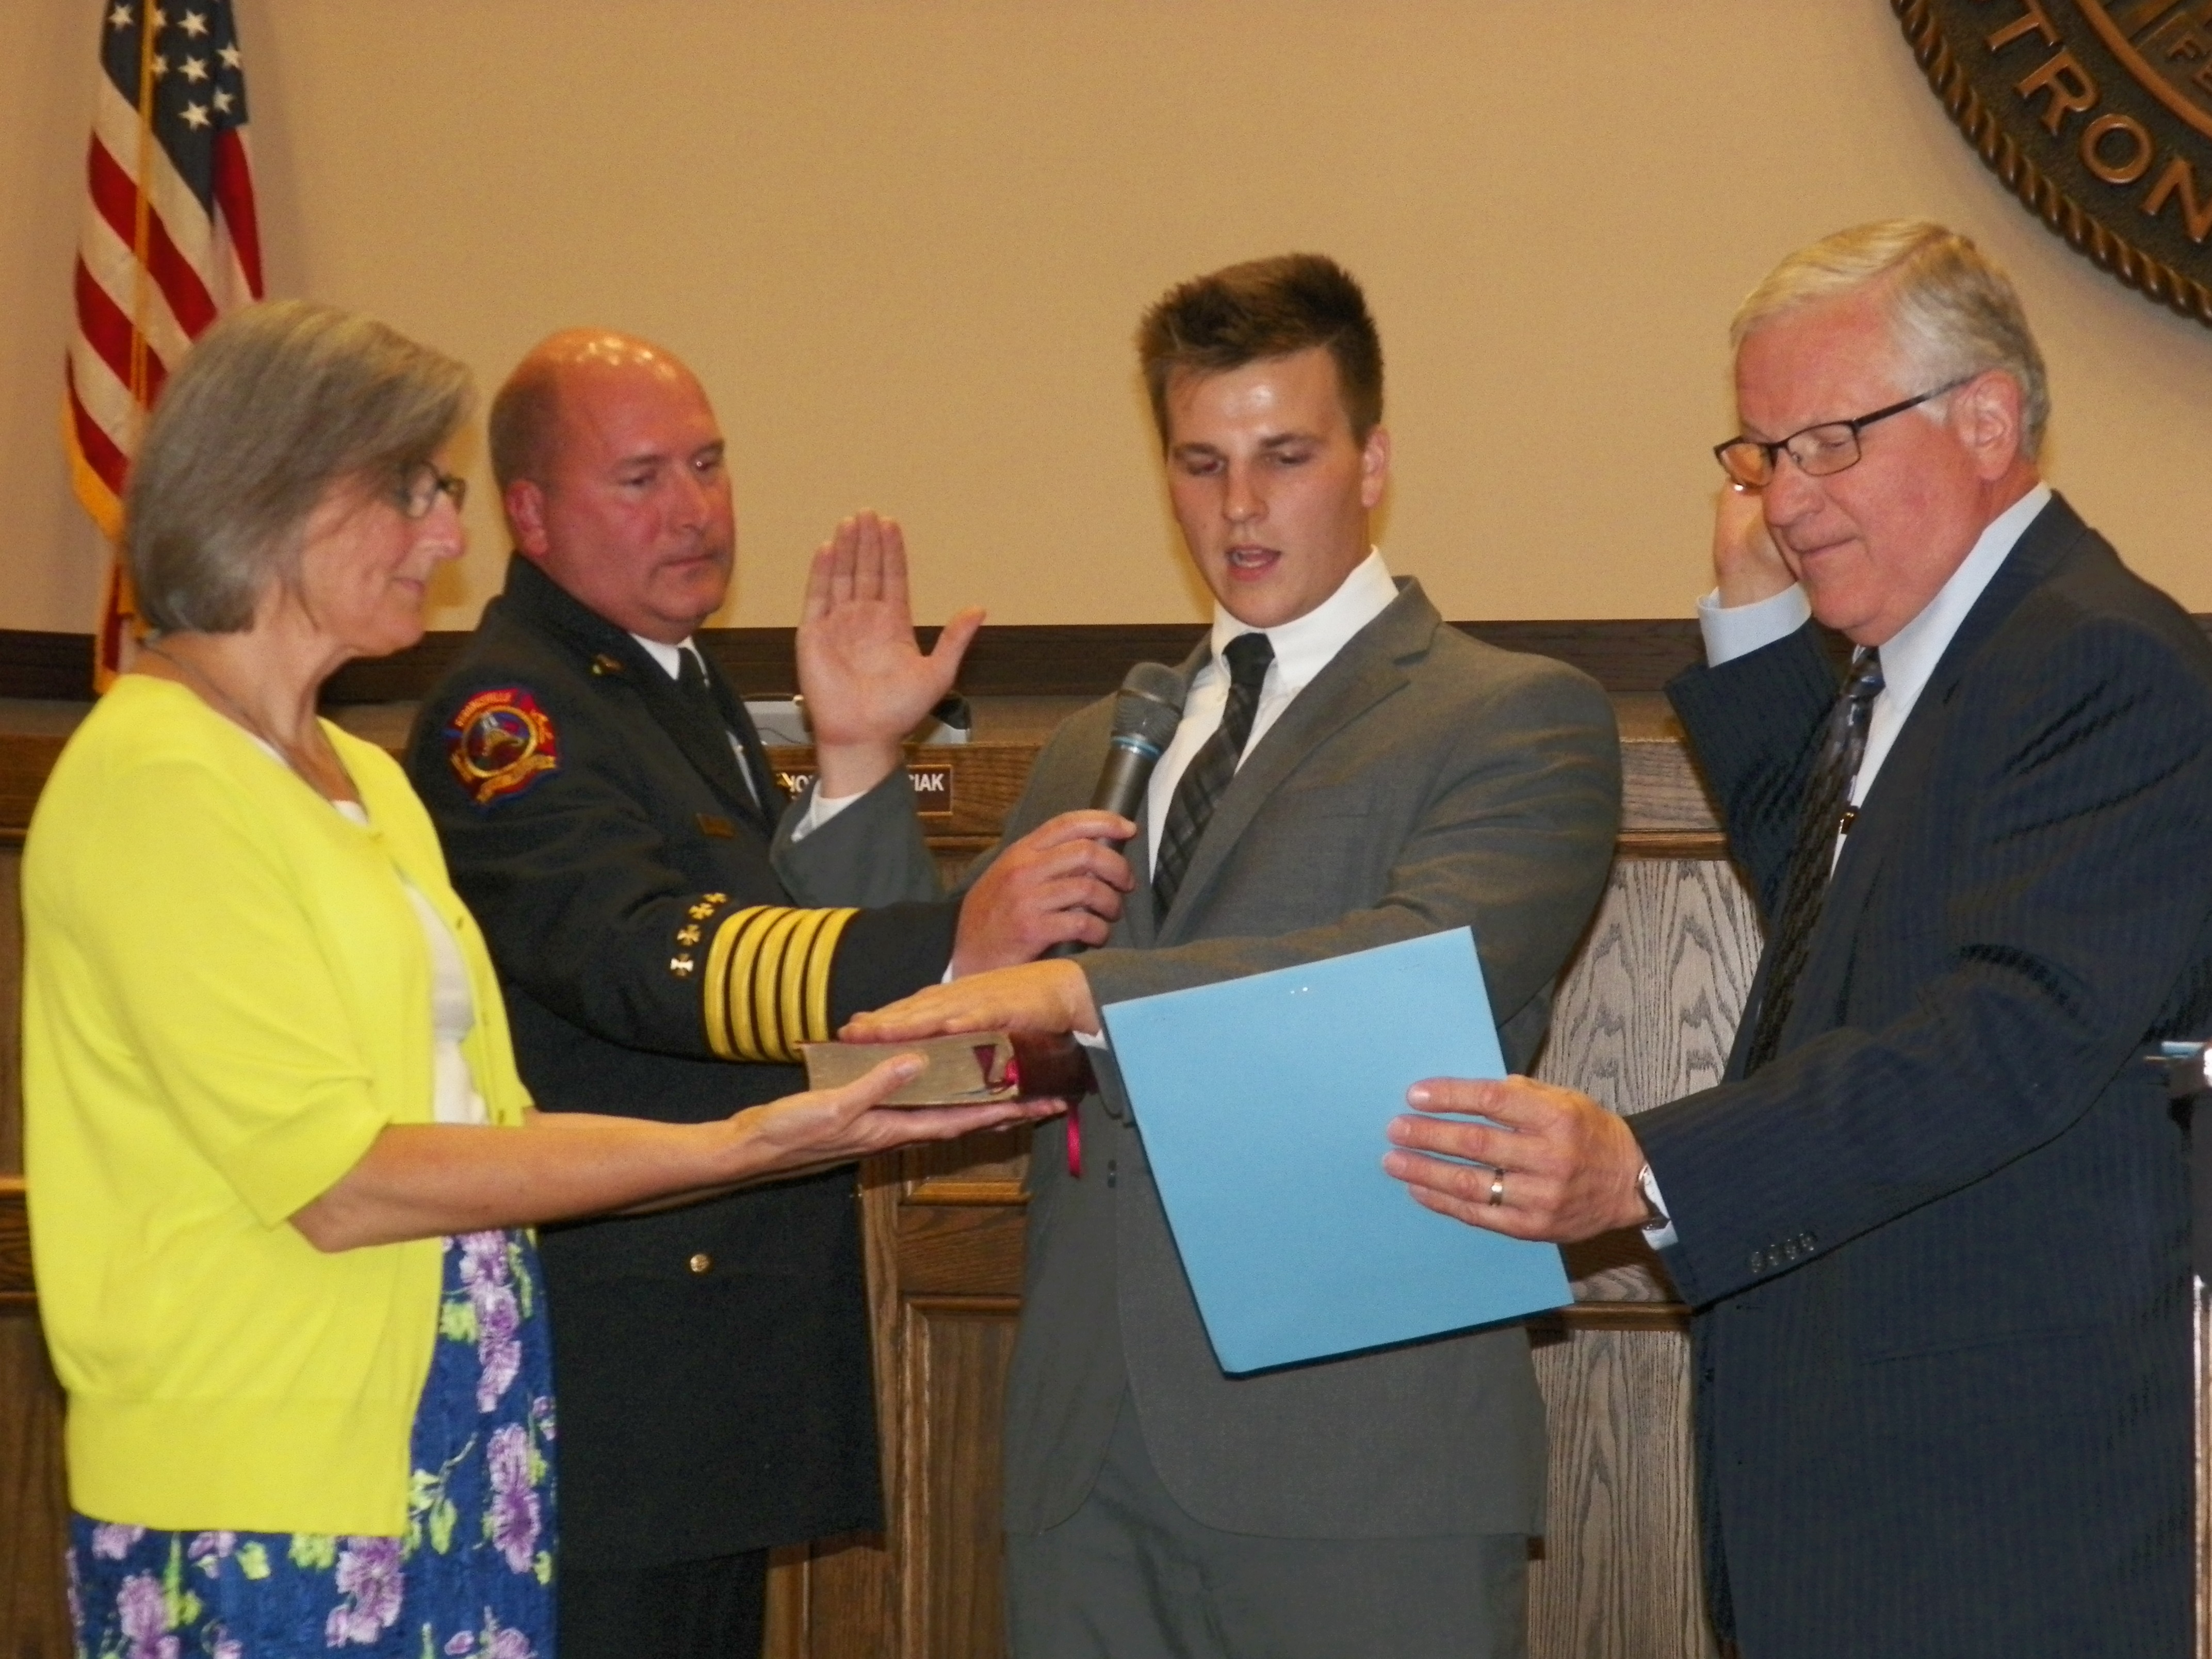 Two New Firefighters Join the Department